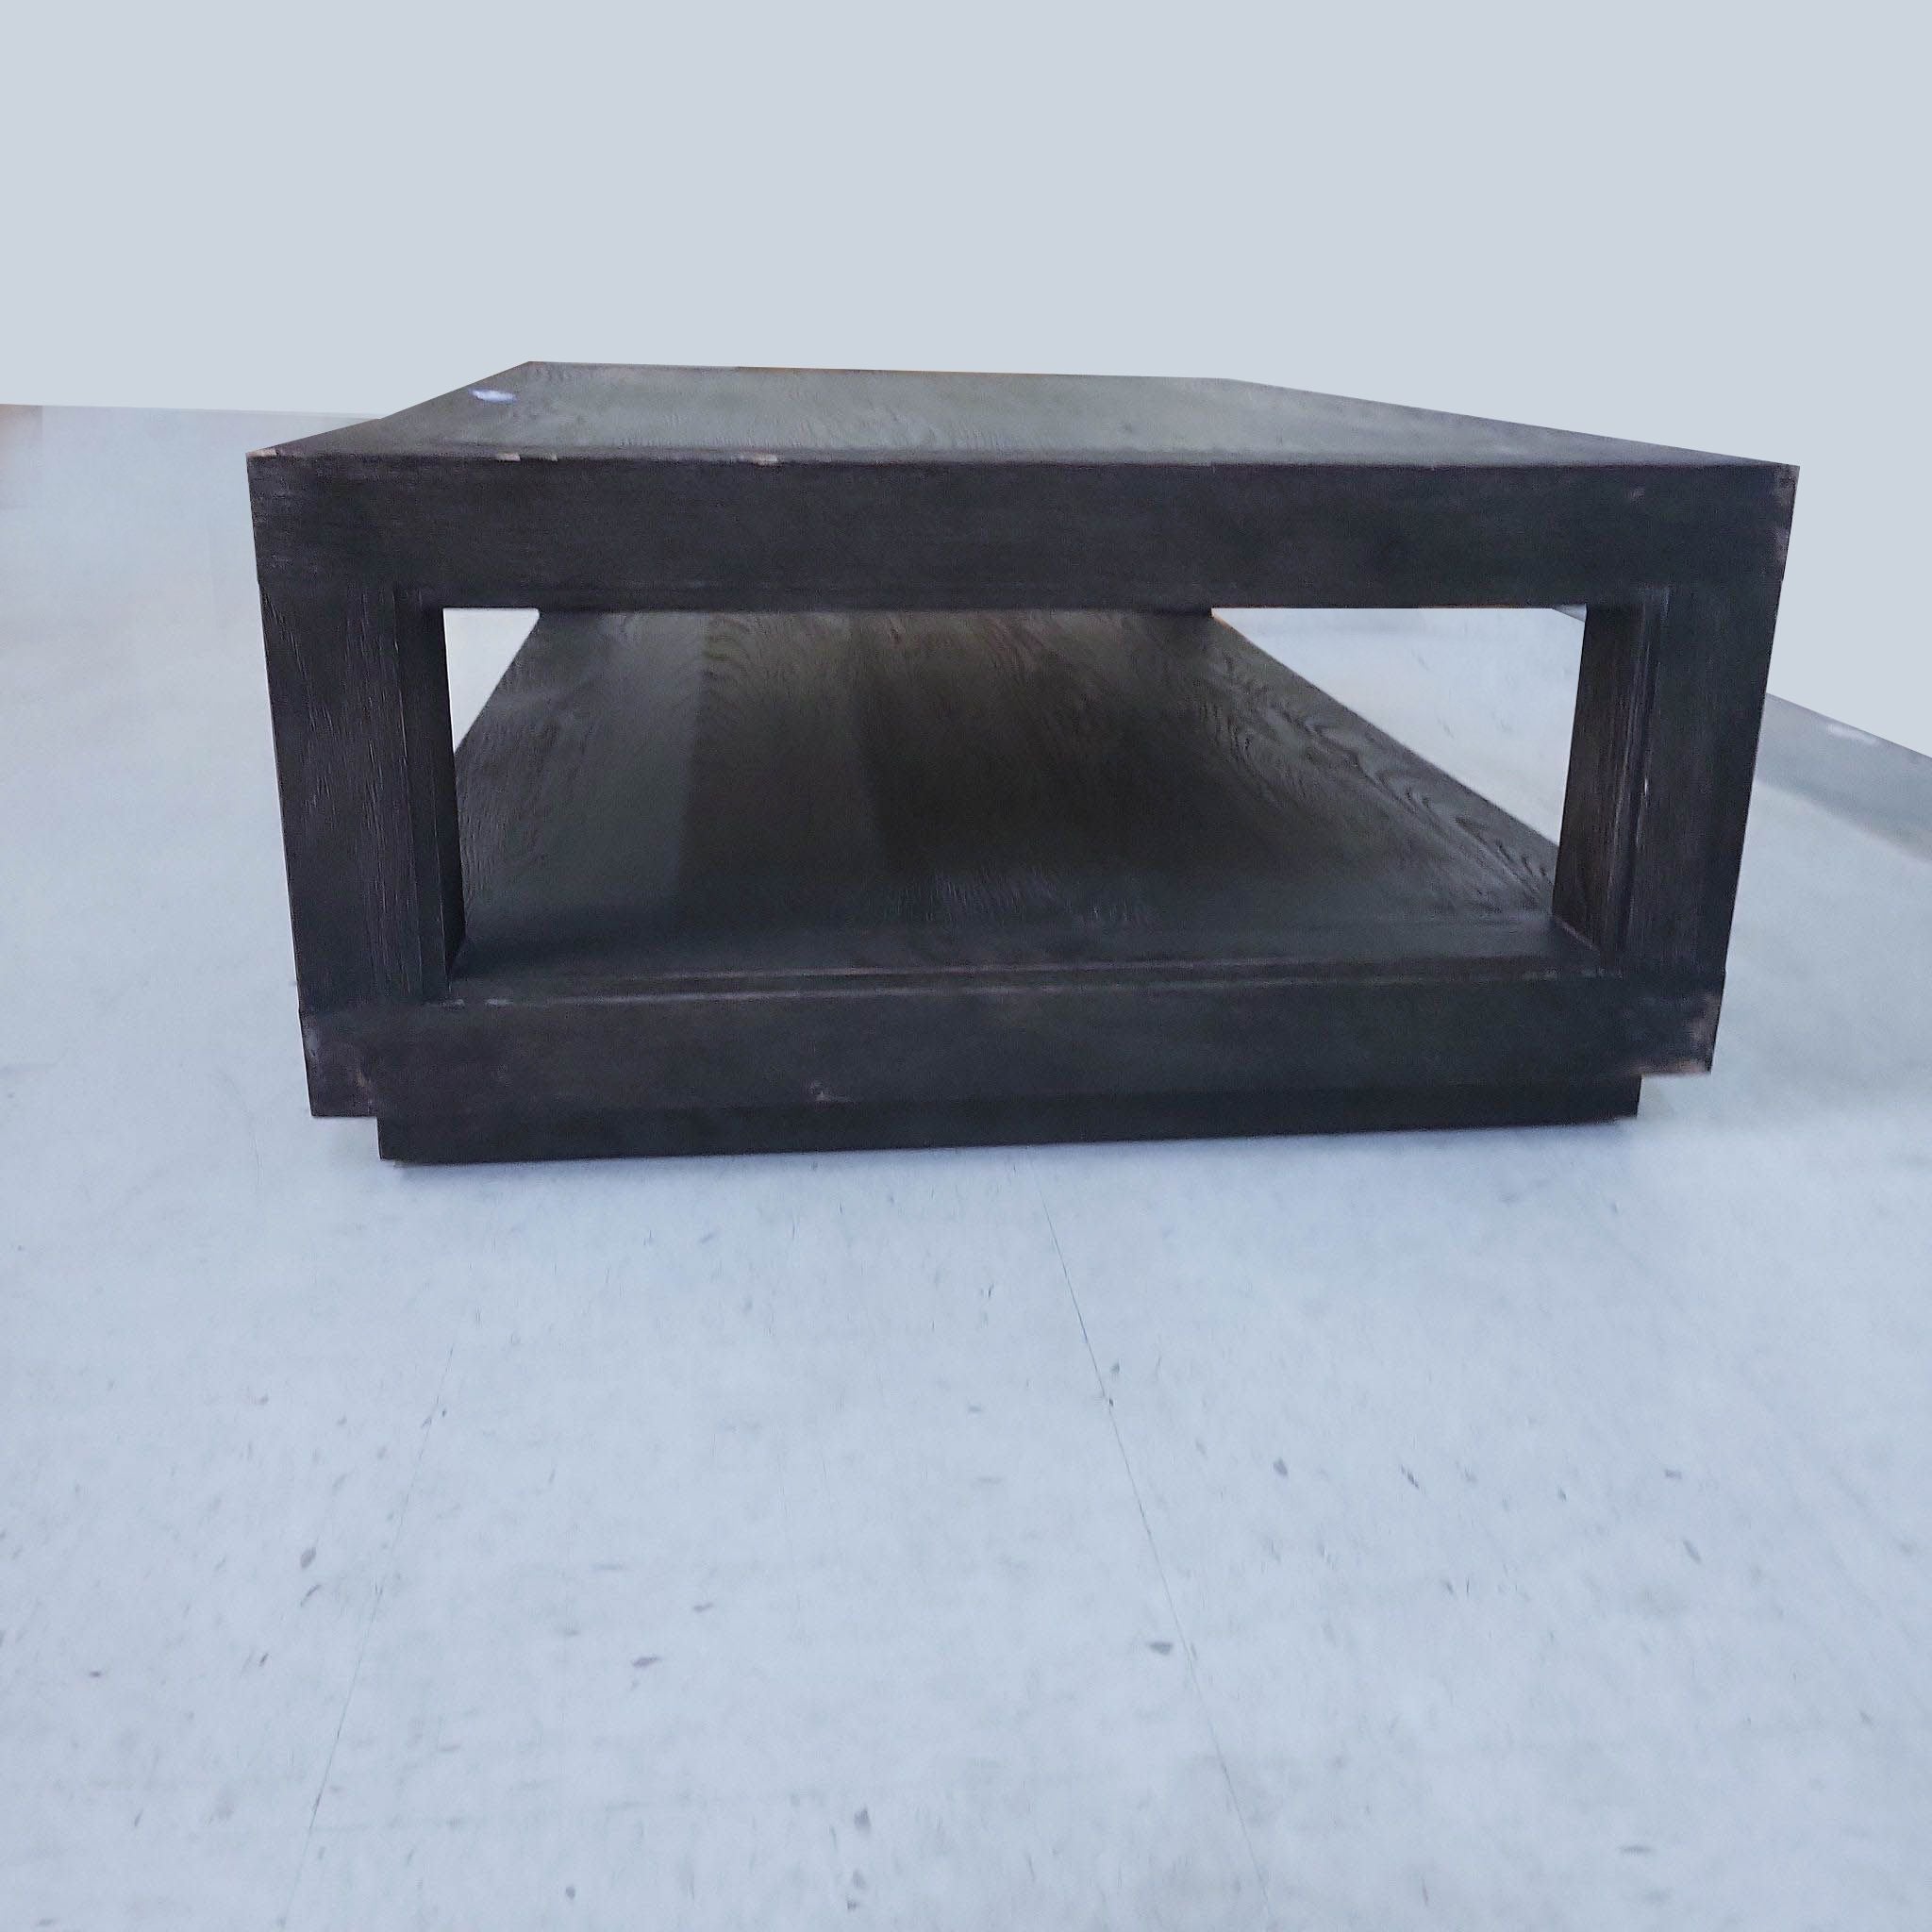 Restoration Hardware dark wood coffee table with a lower shelf, displayed on a plain background.